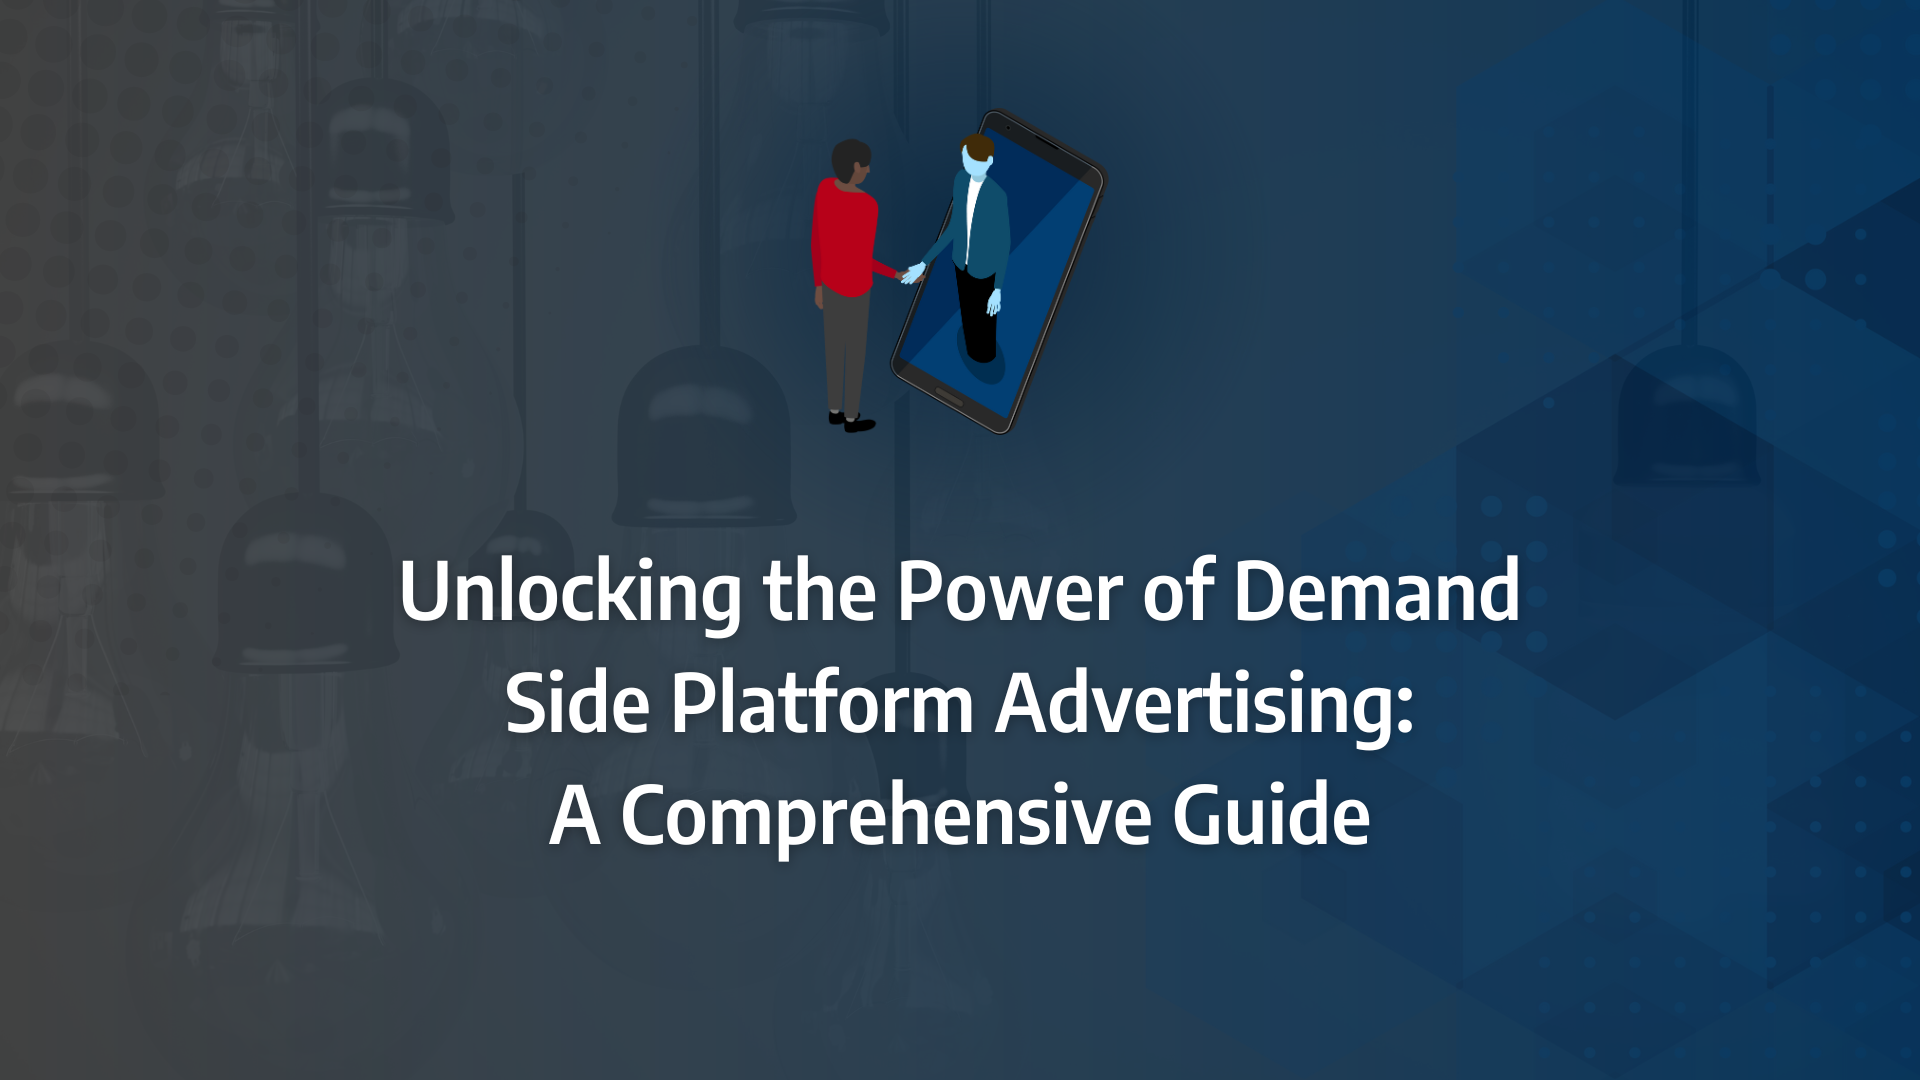 the ultimate guide to demand side platform advertising incorporating time bidding, online advertising, digital advertising, programmatic advertising, dsp advertising, ad server